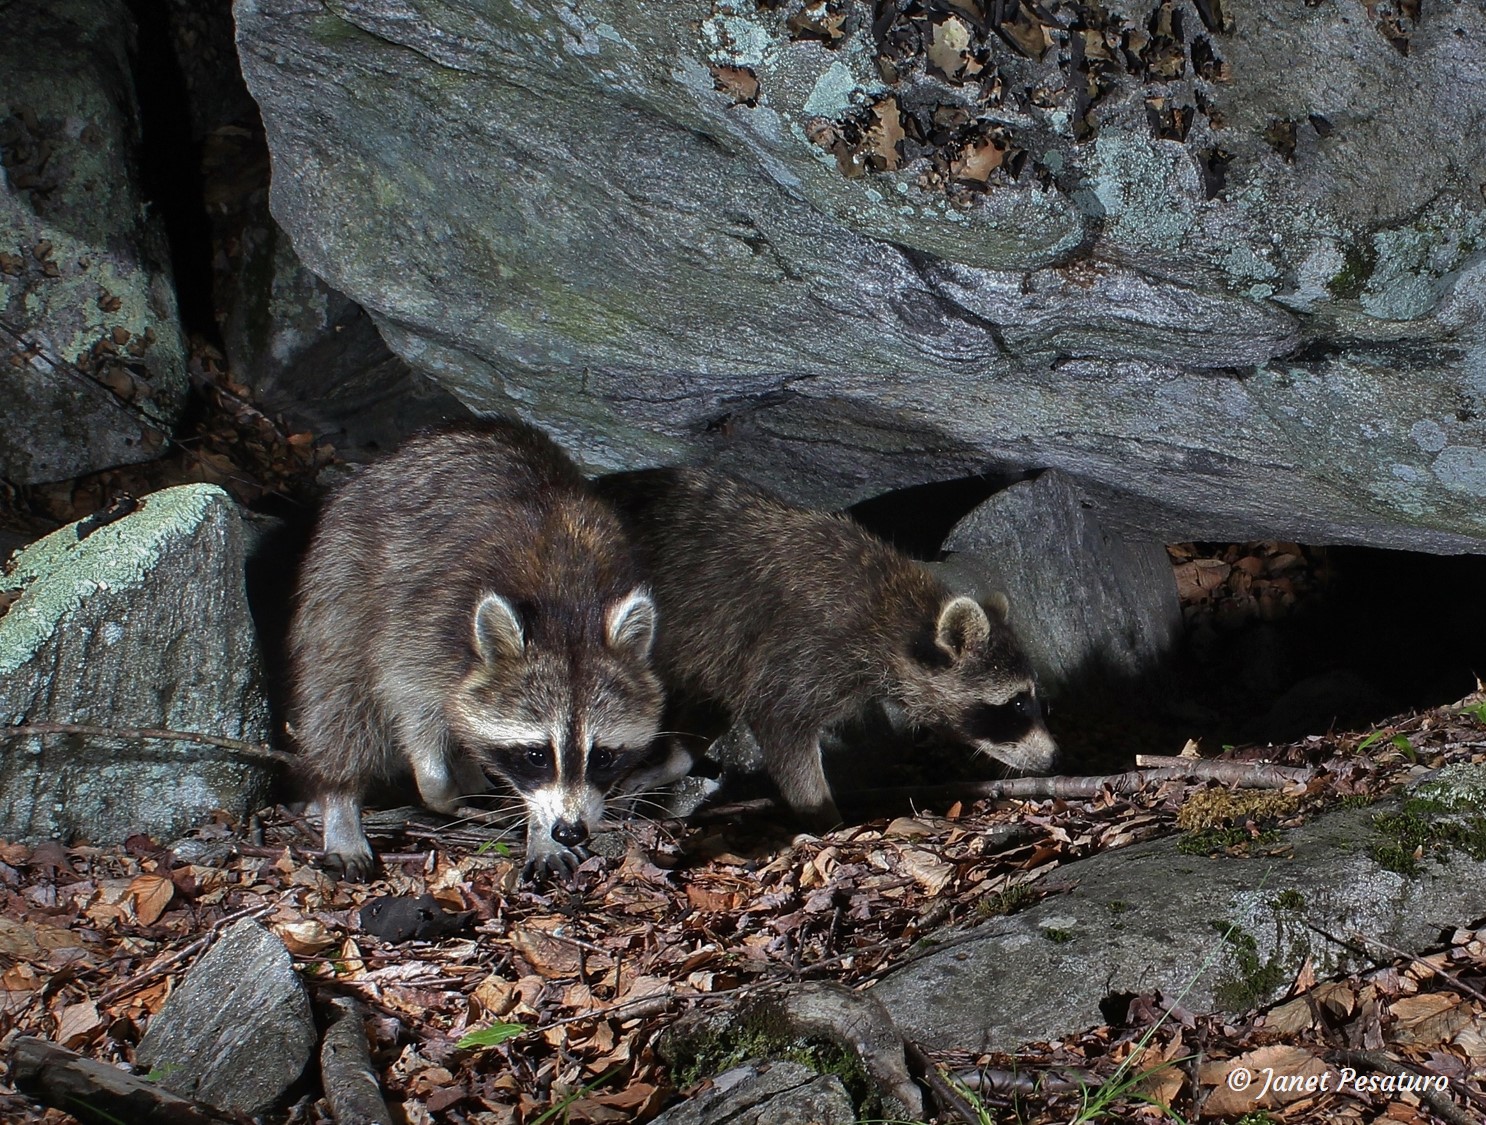 raccoons often visit and scent mark at porcupine cave dens